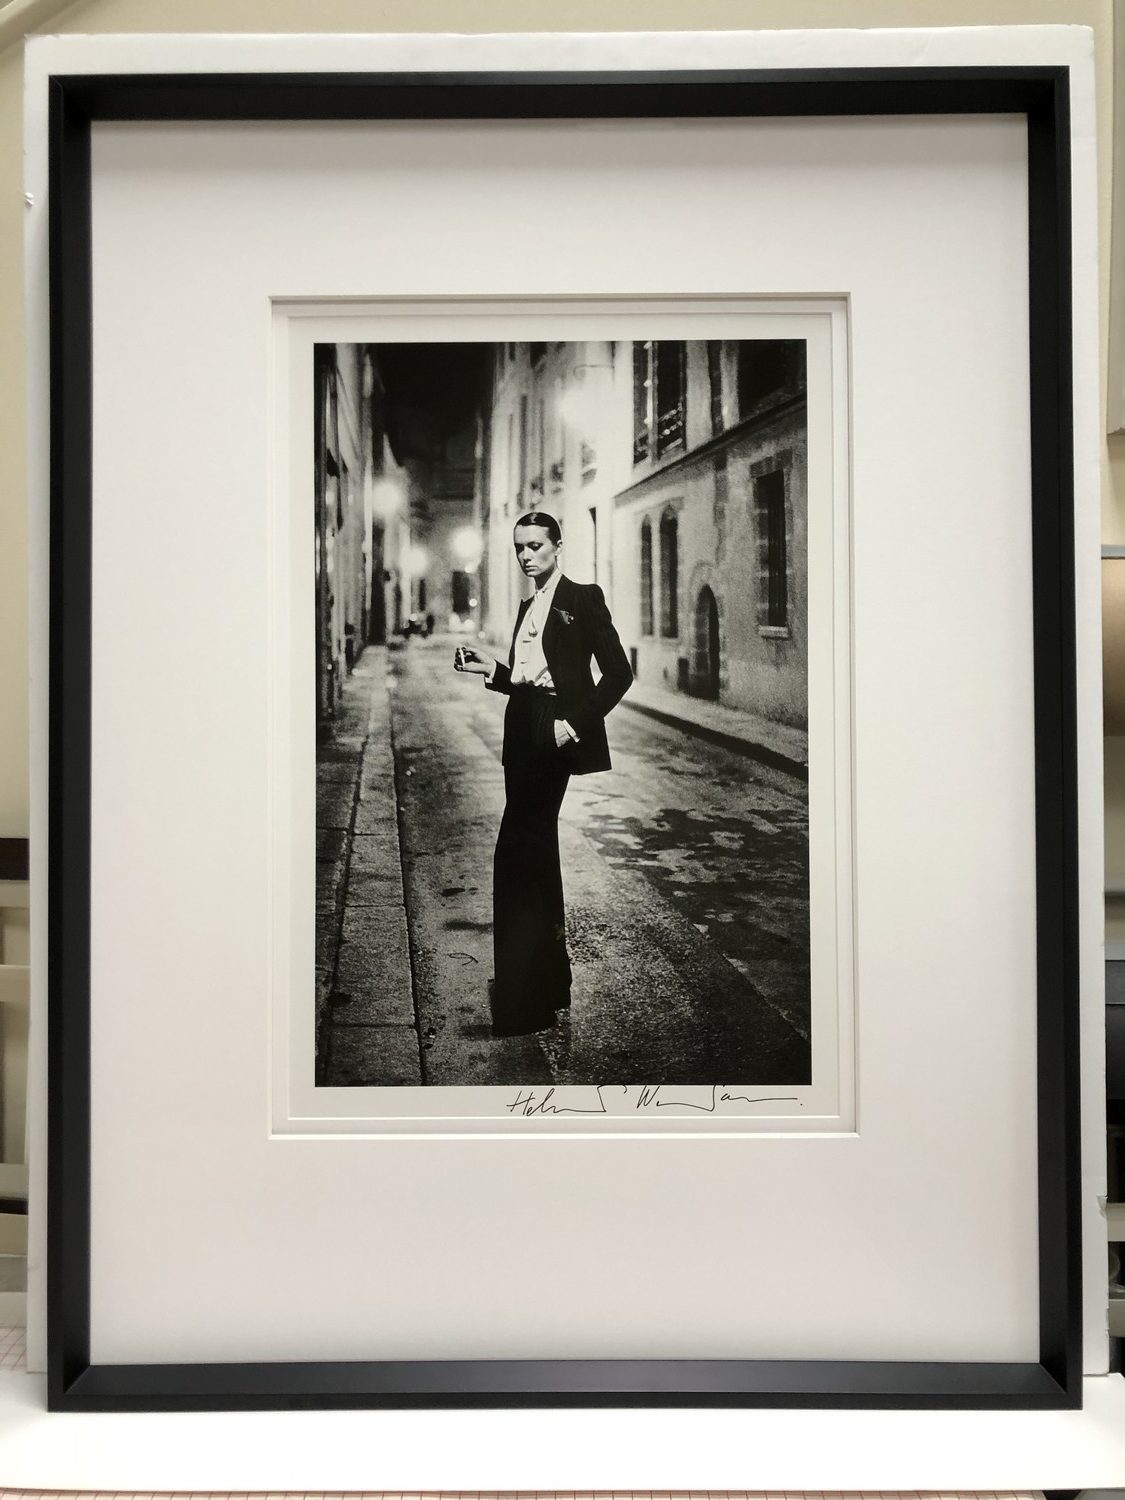 Photo by: Helmut Newton in black frame